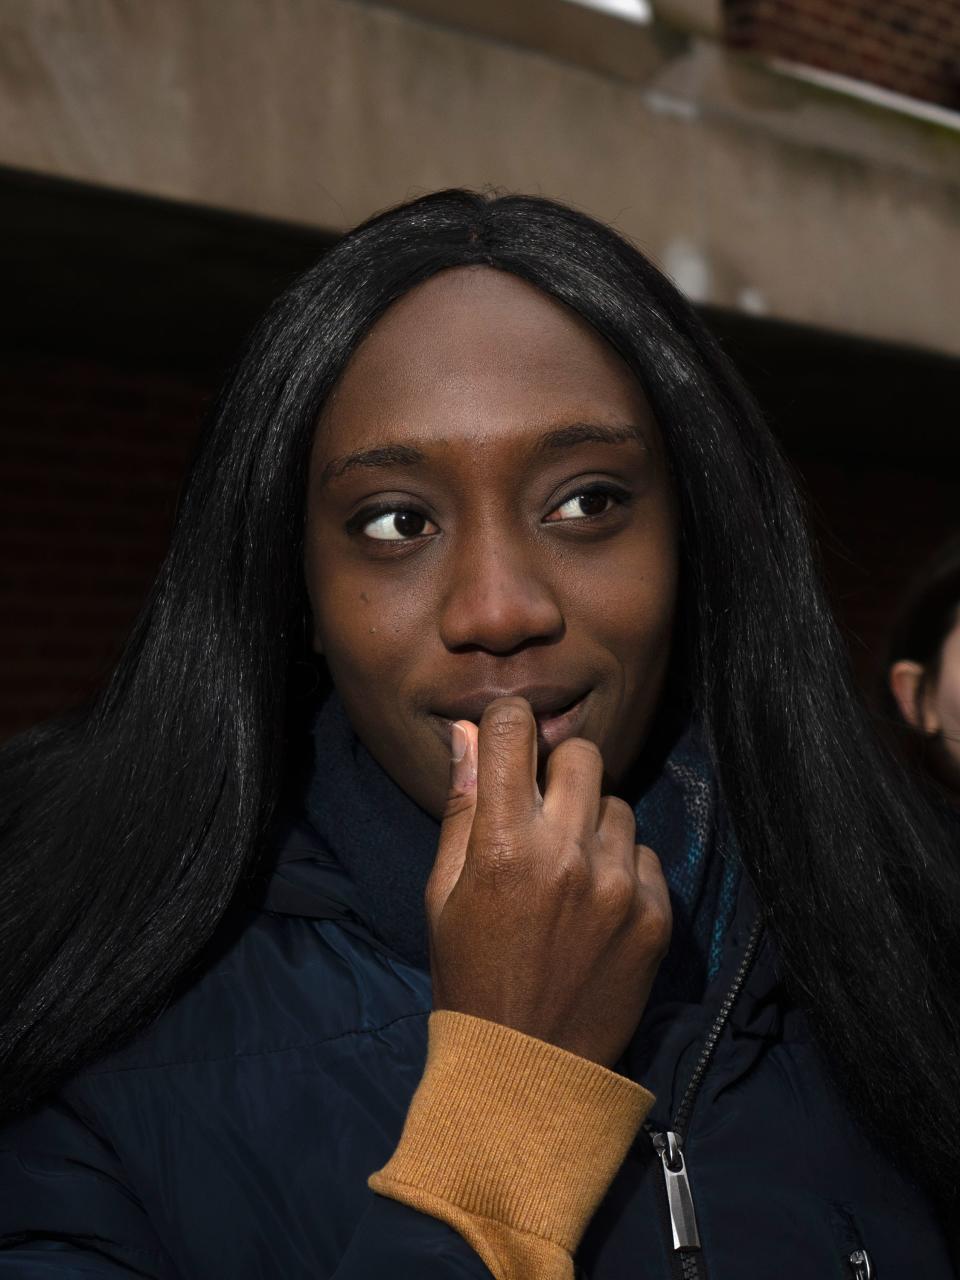 Tunshore, 18, born in Nigeria and a student at NYU: "I'm still feeling it out. We’ll see how it goes and what I decide. Gun control is really important, medical care is really important."